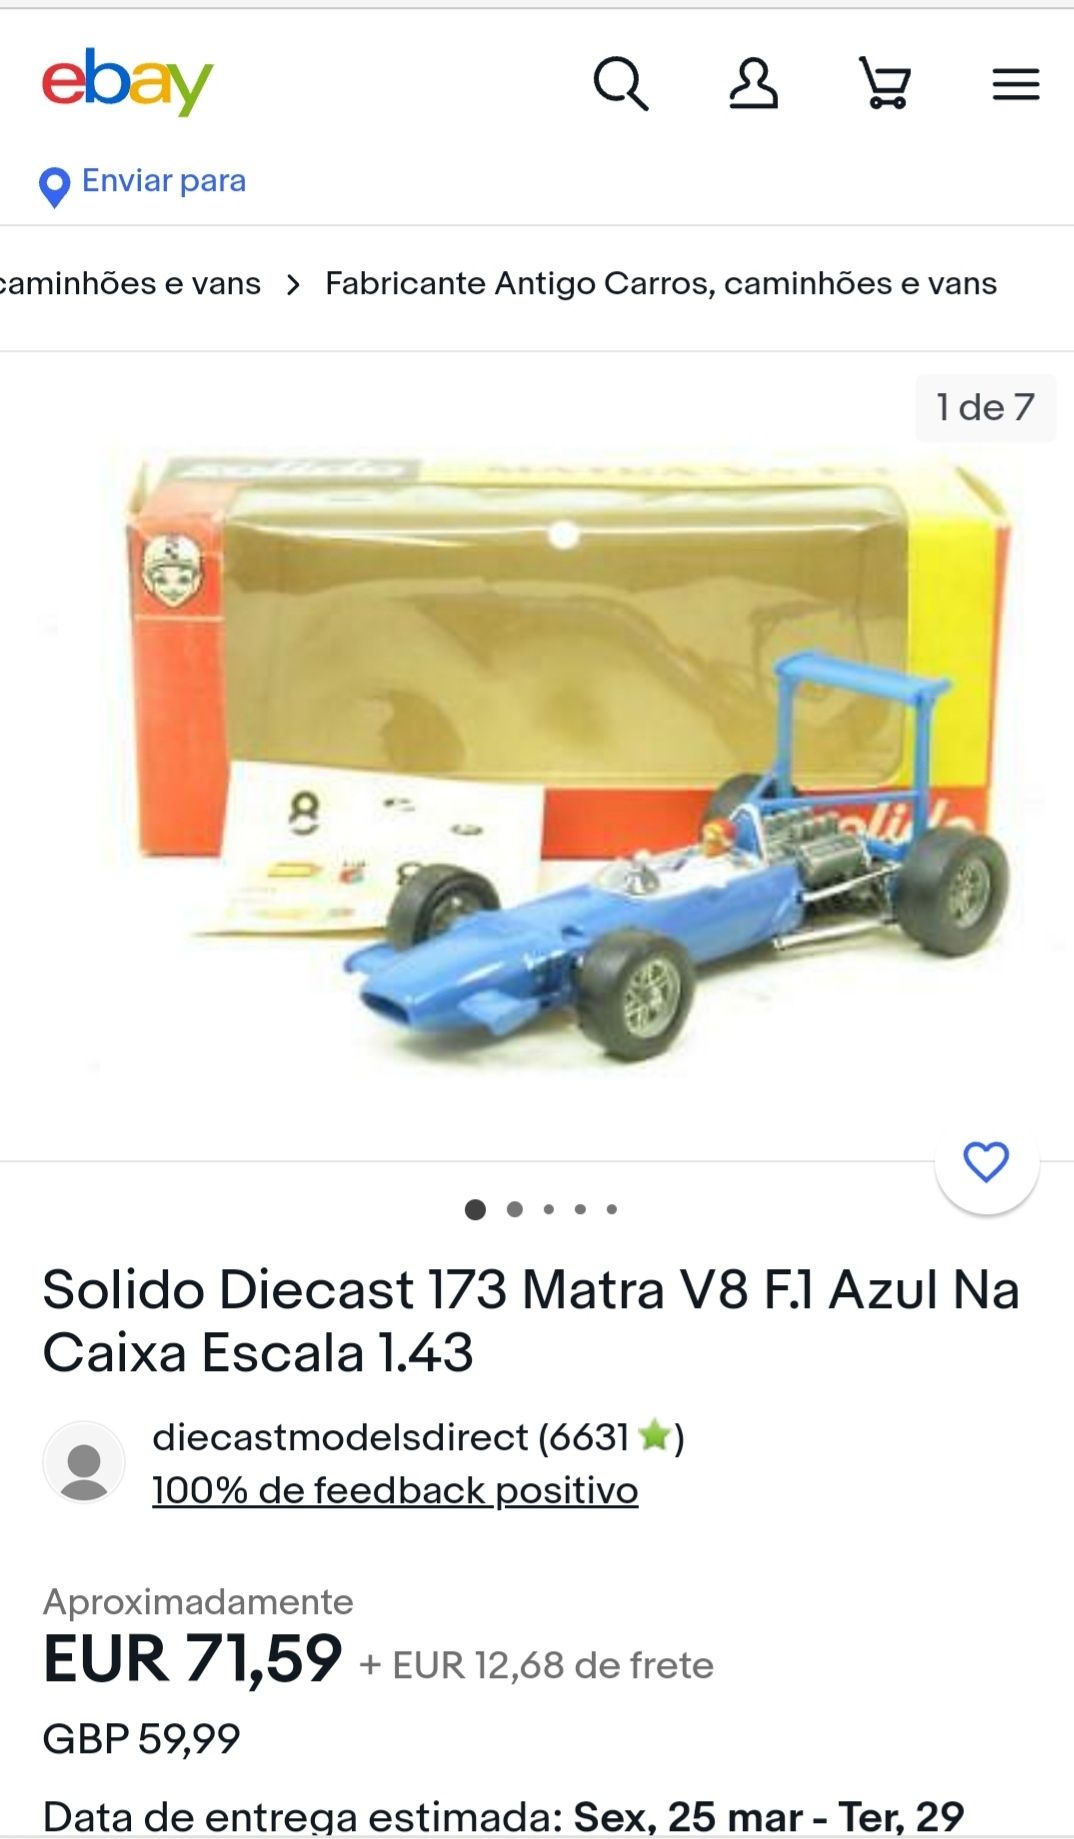 Lot of 6 diecast Solido (France)